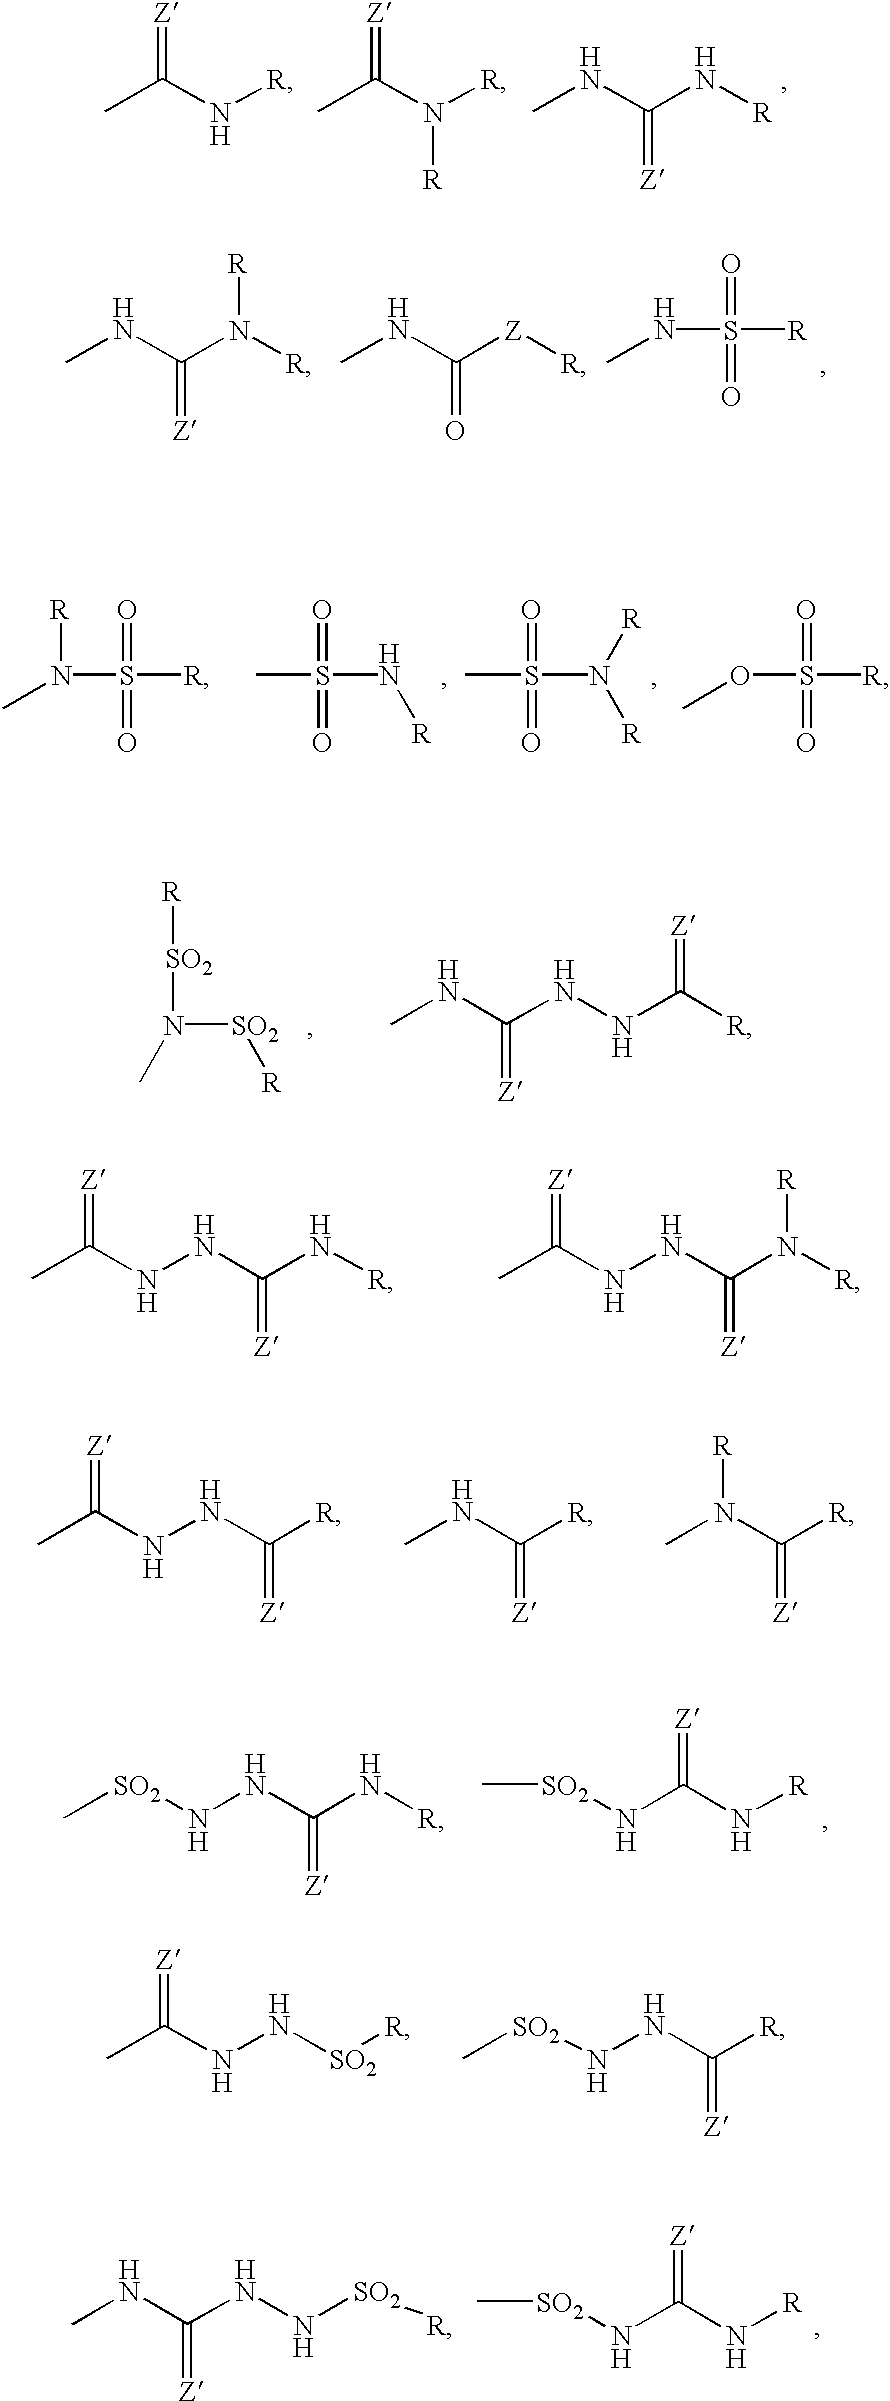 Bisubstituted carbocyclic cyclophilin binding compounds and their use